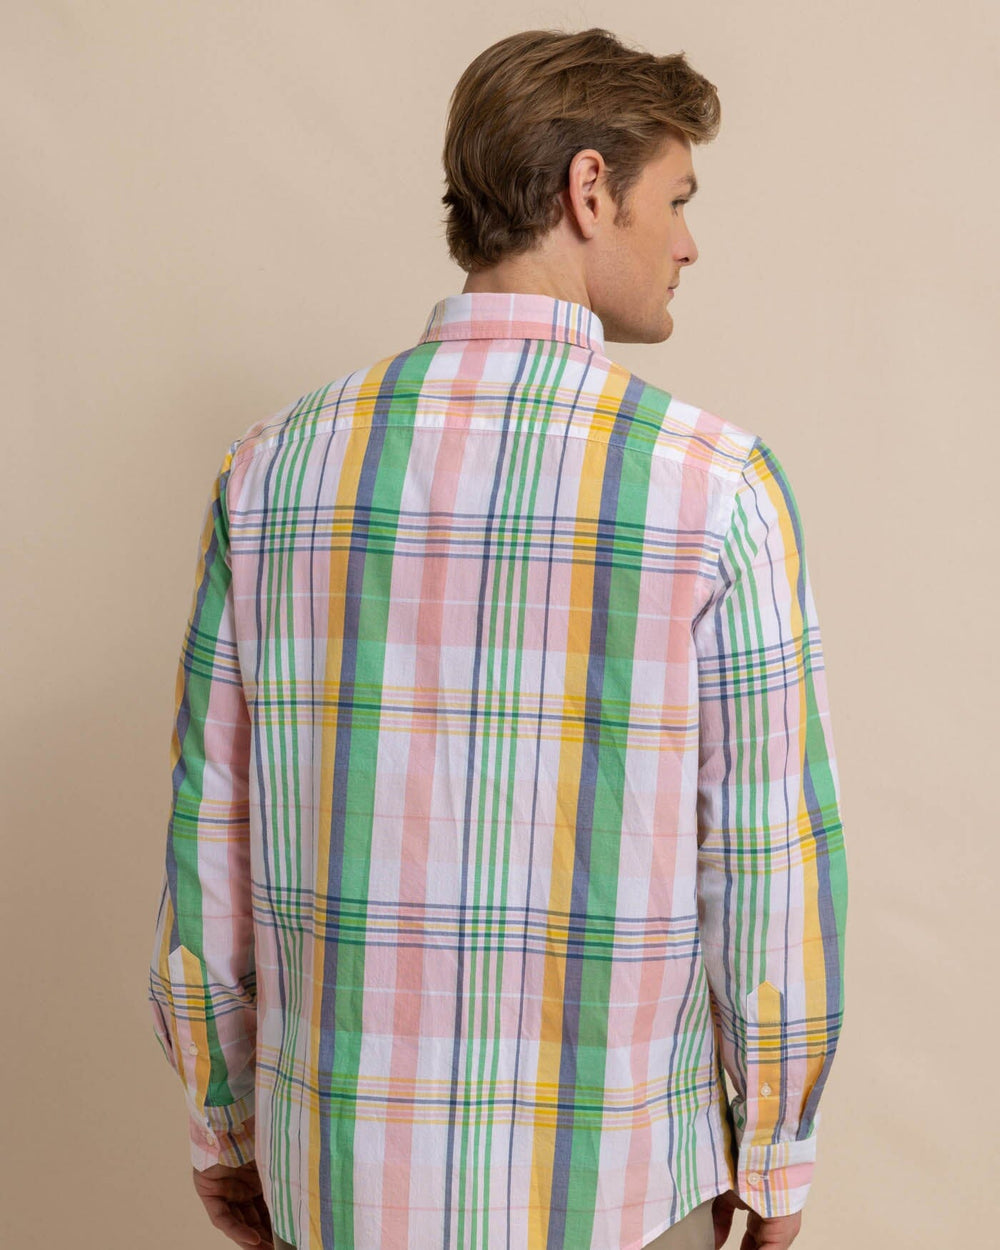 The back view of the Southern Tide Springers Point Madras Plaid Long Sleeve Sport Shirt by Southern Tide - Classic White